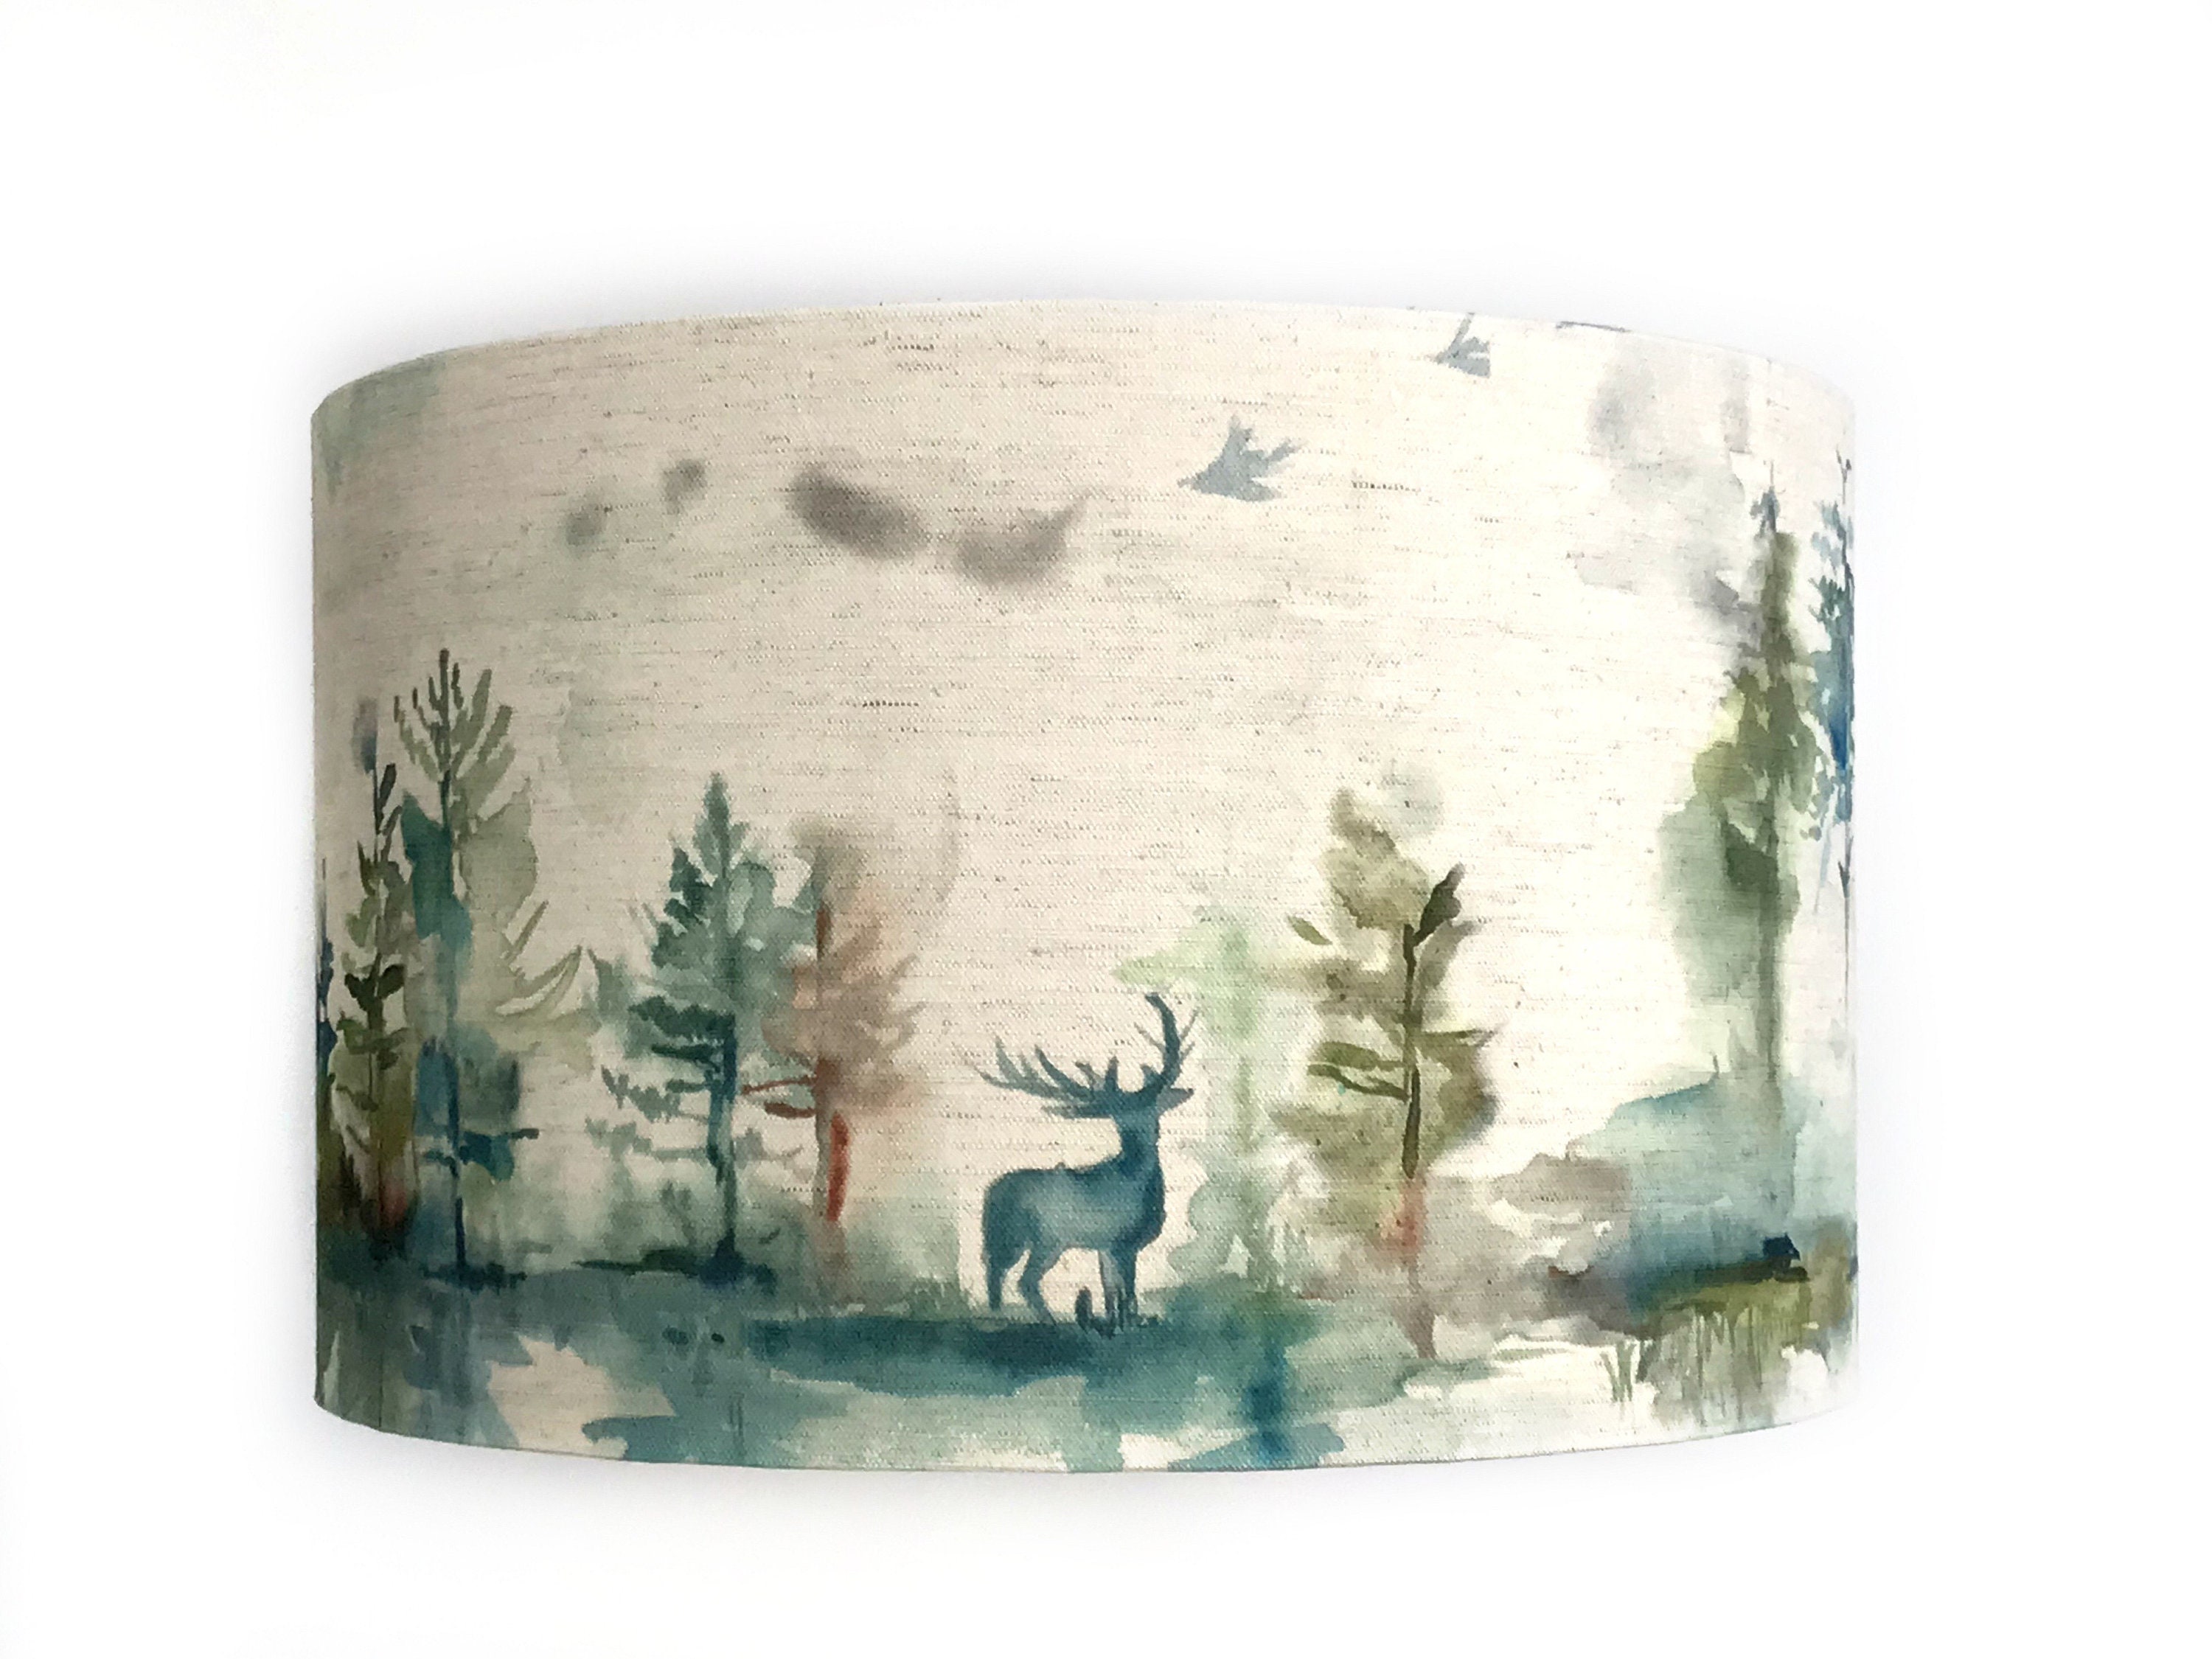 20cm 8 Clarke STAG TABLE LAMPSHADE